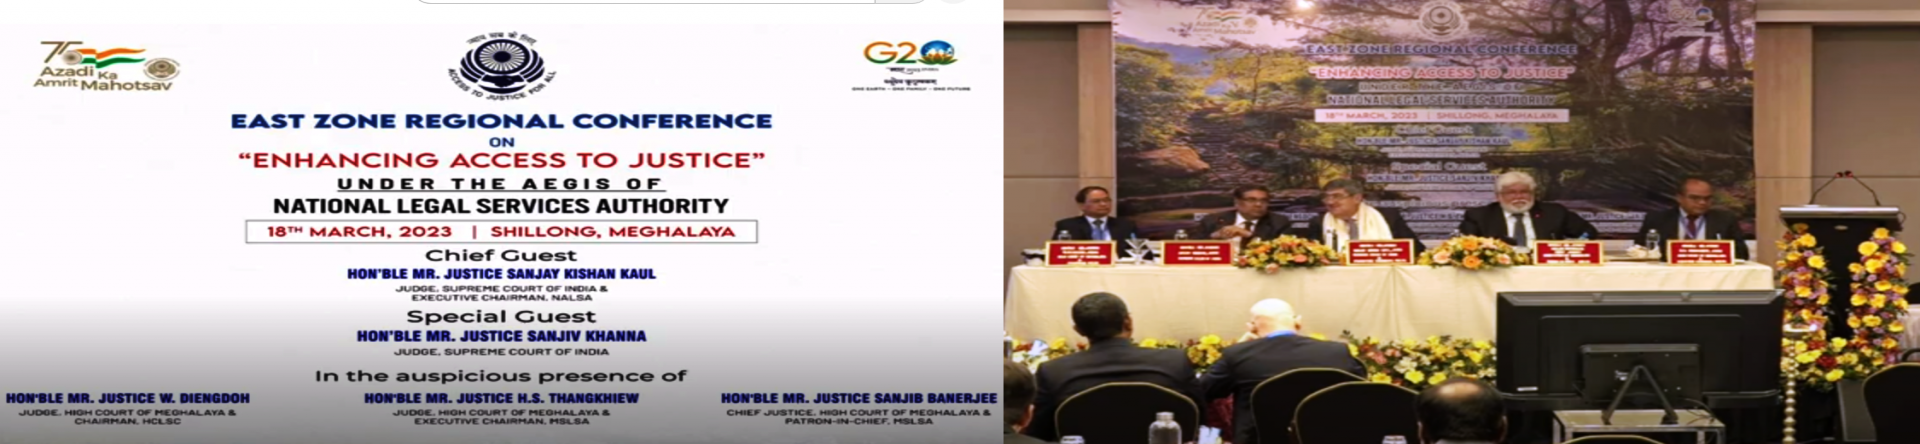 EAST ZONE REGIONAL CONFERENCE ON "ENHANCING ACCESS TO JUSTICE" UNDER THE AEGIS OF NATIONAL LEGAL SERVICES AUTHORITY 18TH MARCH, 2023 SHILLONG, MEGHALAYA